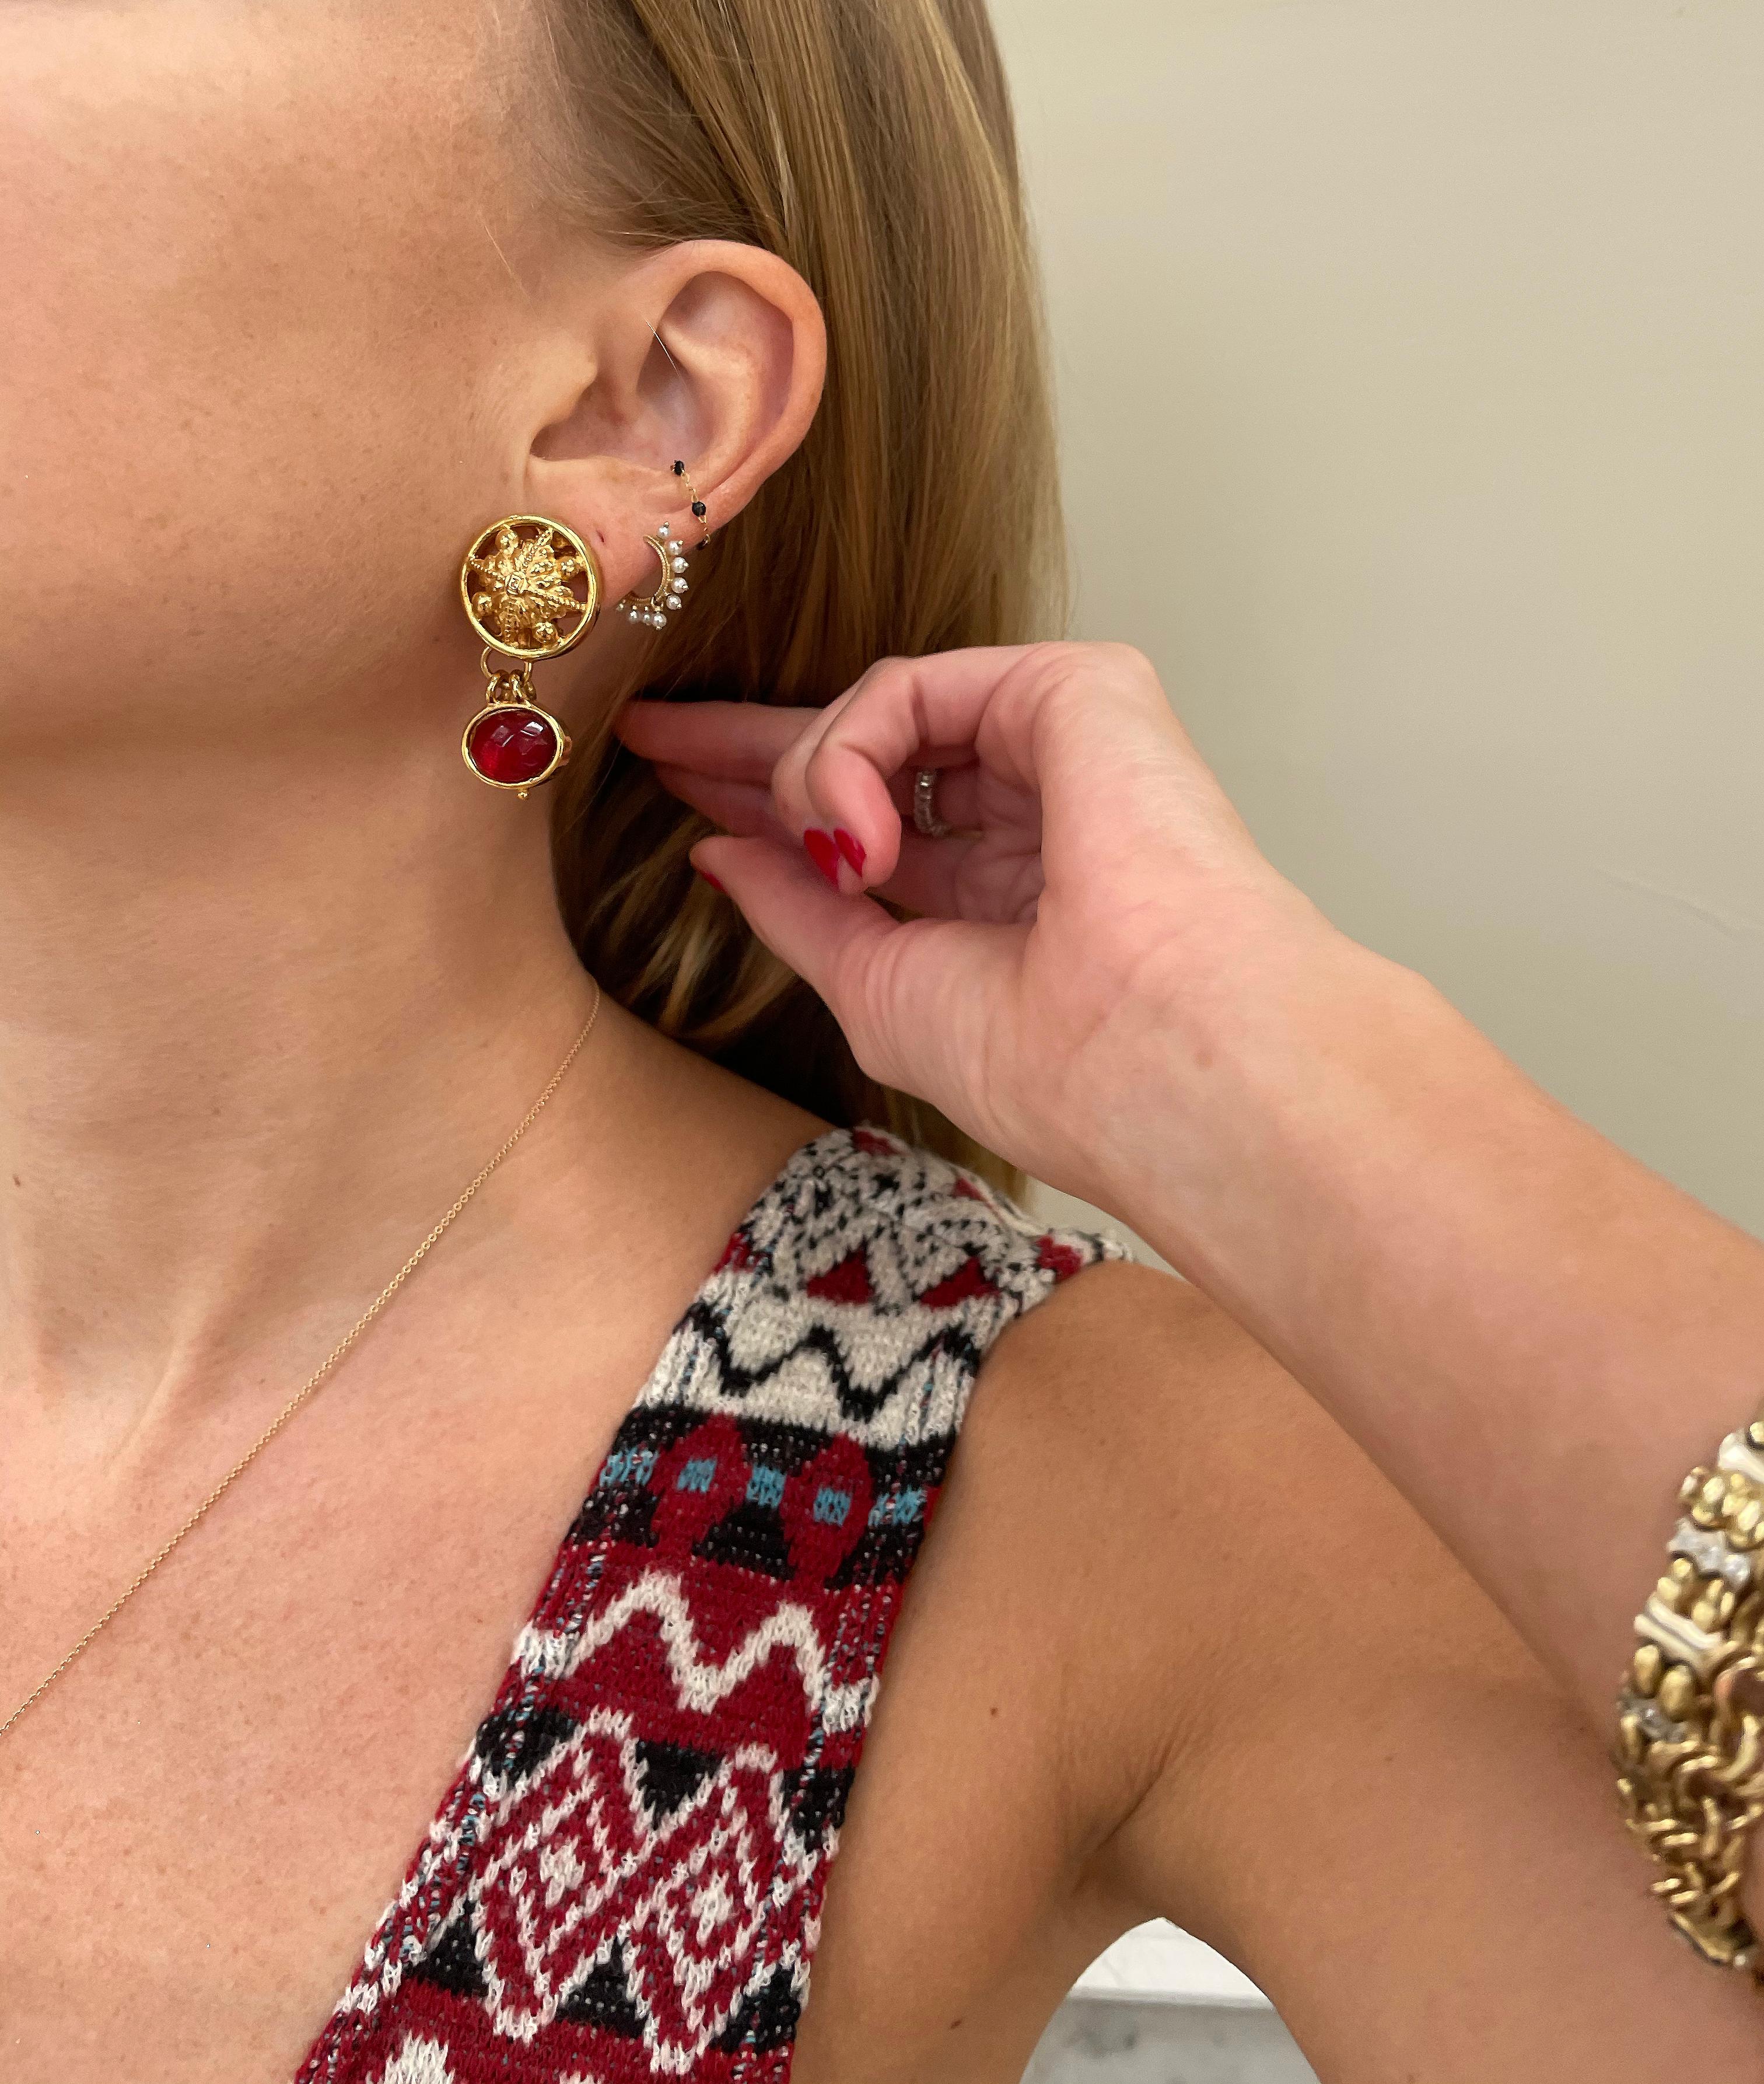 Vintage Fendi Drop Earrings: These earrings  are super rare— it's not so easy to come by Fendi jewelry from this era, and this pair is especially unique. Made in the 1980s, features an ornate gold medallion with the house's signature FF logo, and a